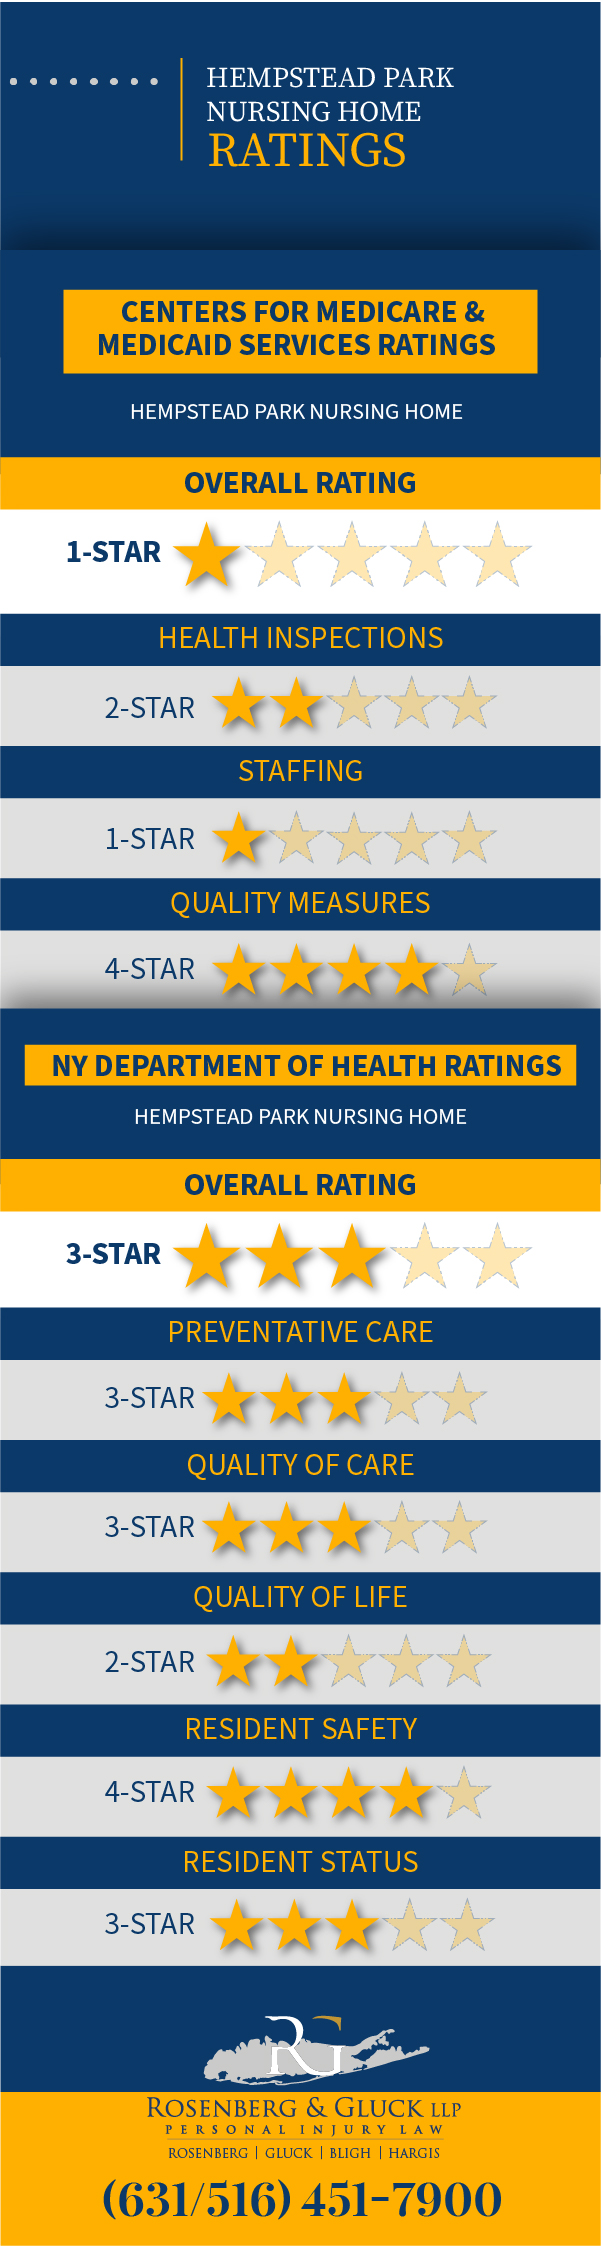 Hempstead Park Nursing Home Violations and Ratings Infographic